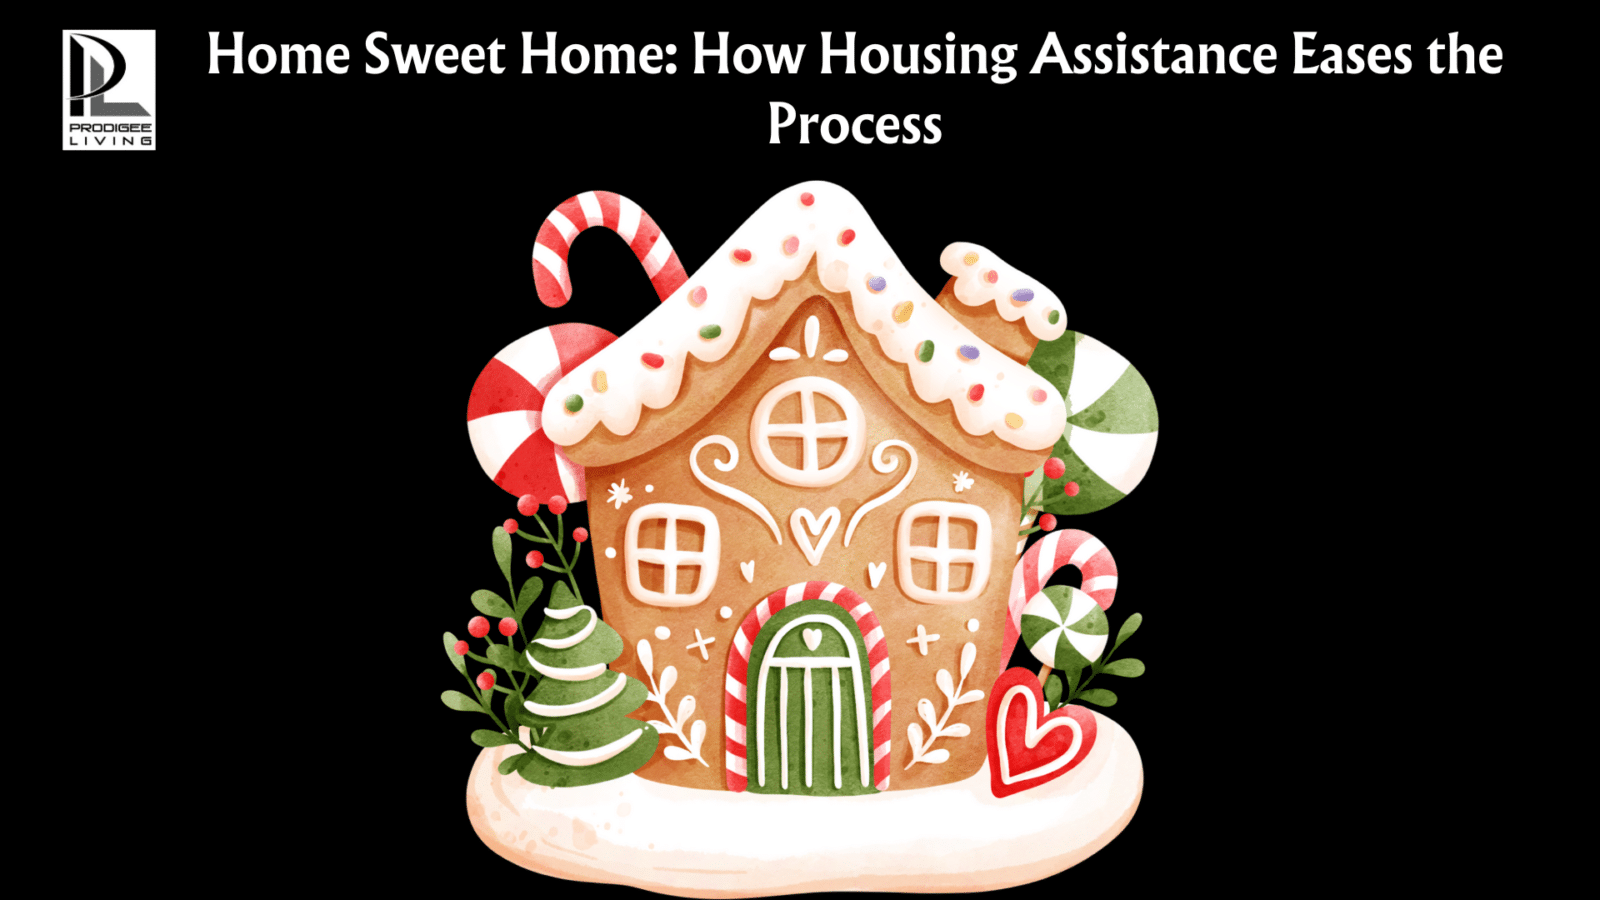 Home sweet home: how housing assistance eases the process